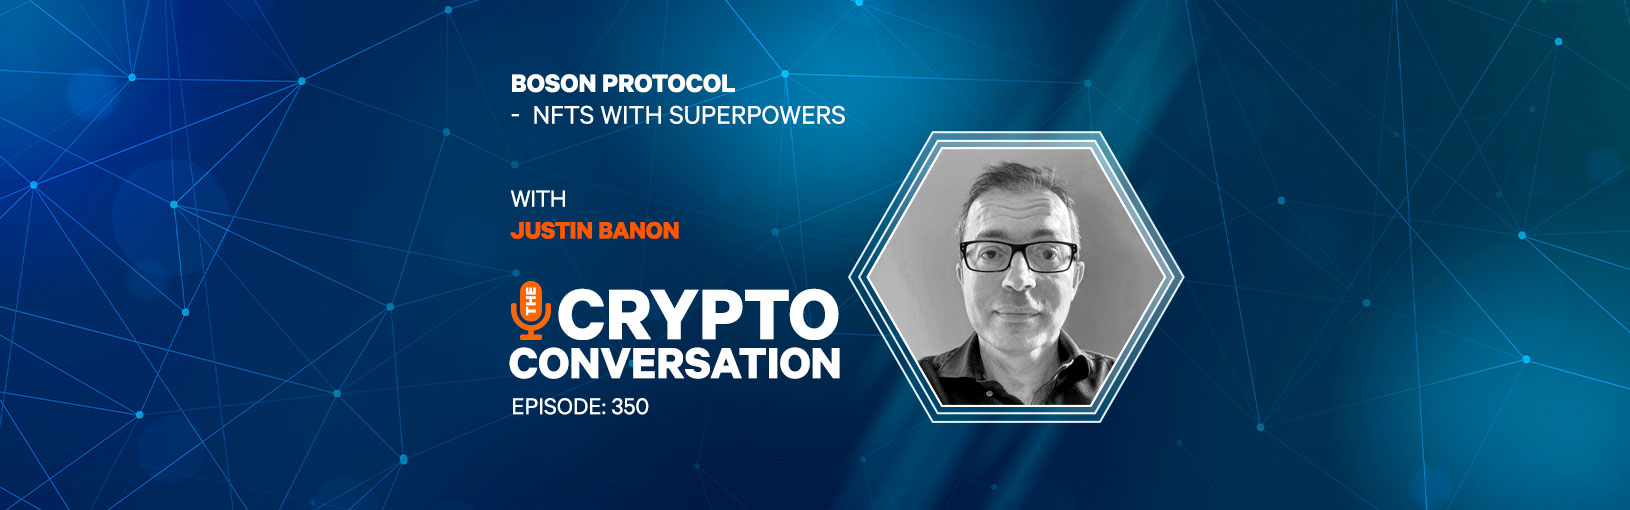 Boson Protocol – NFTs with superpowers